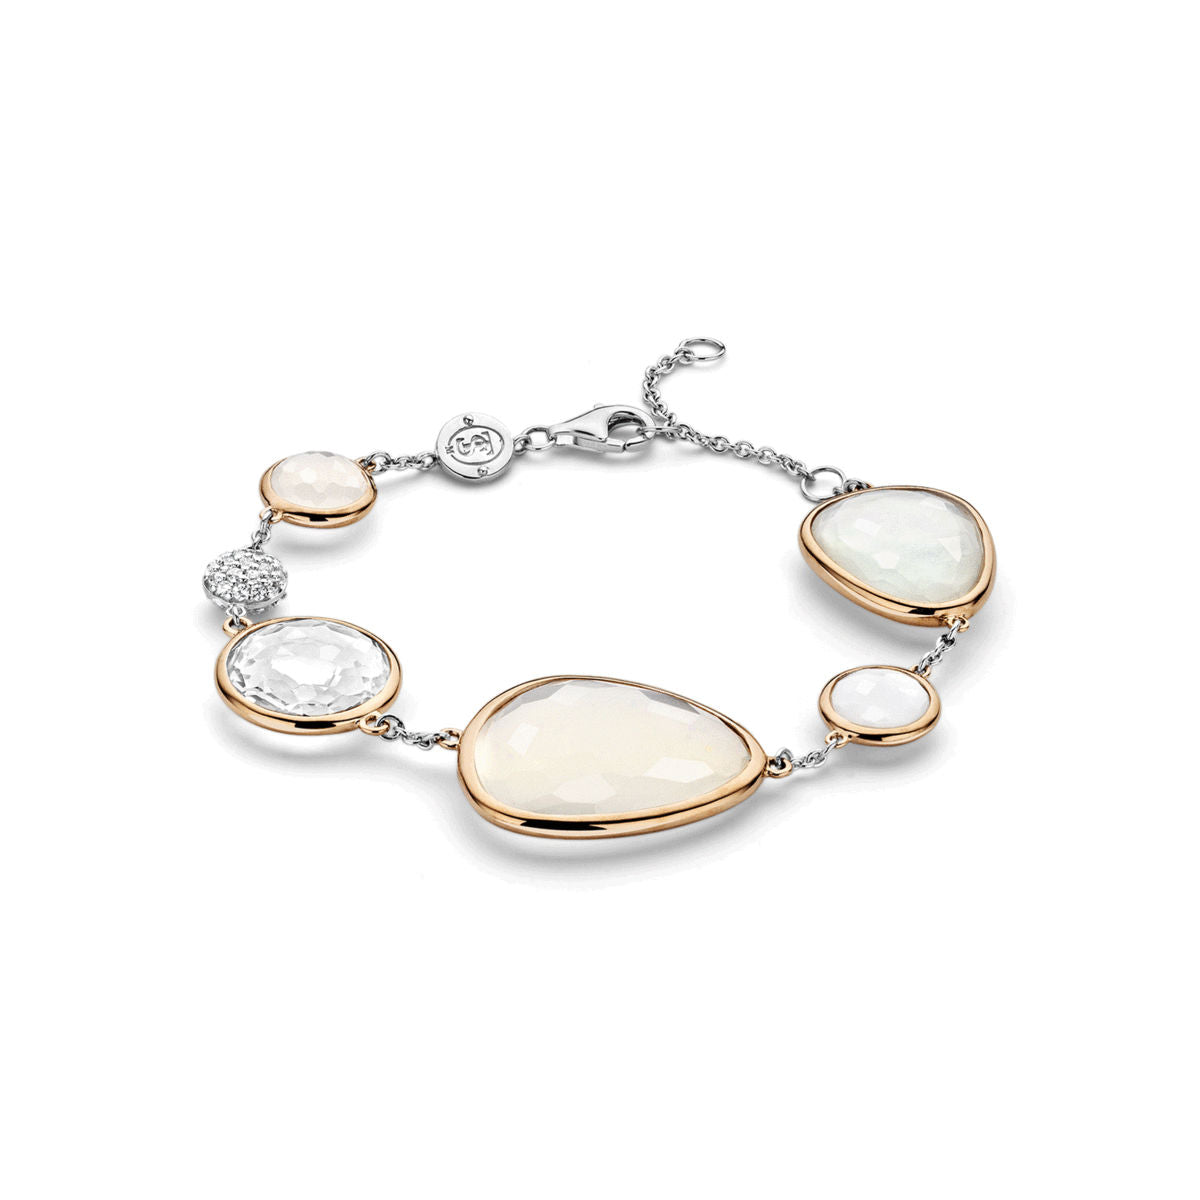 Silver bracelet with mother-of-pearl elements - 2825WM